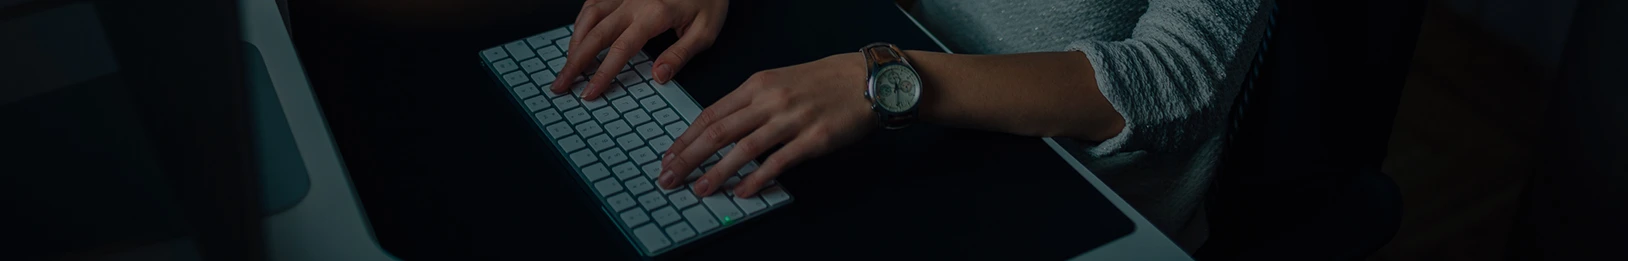 Person typing on the keyboard of a computer